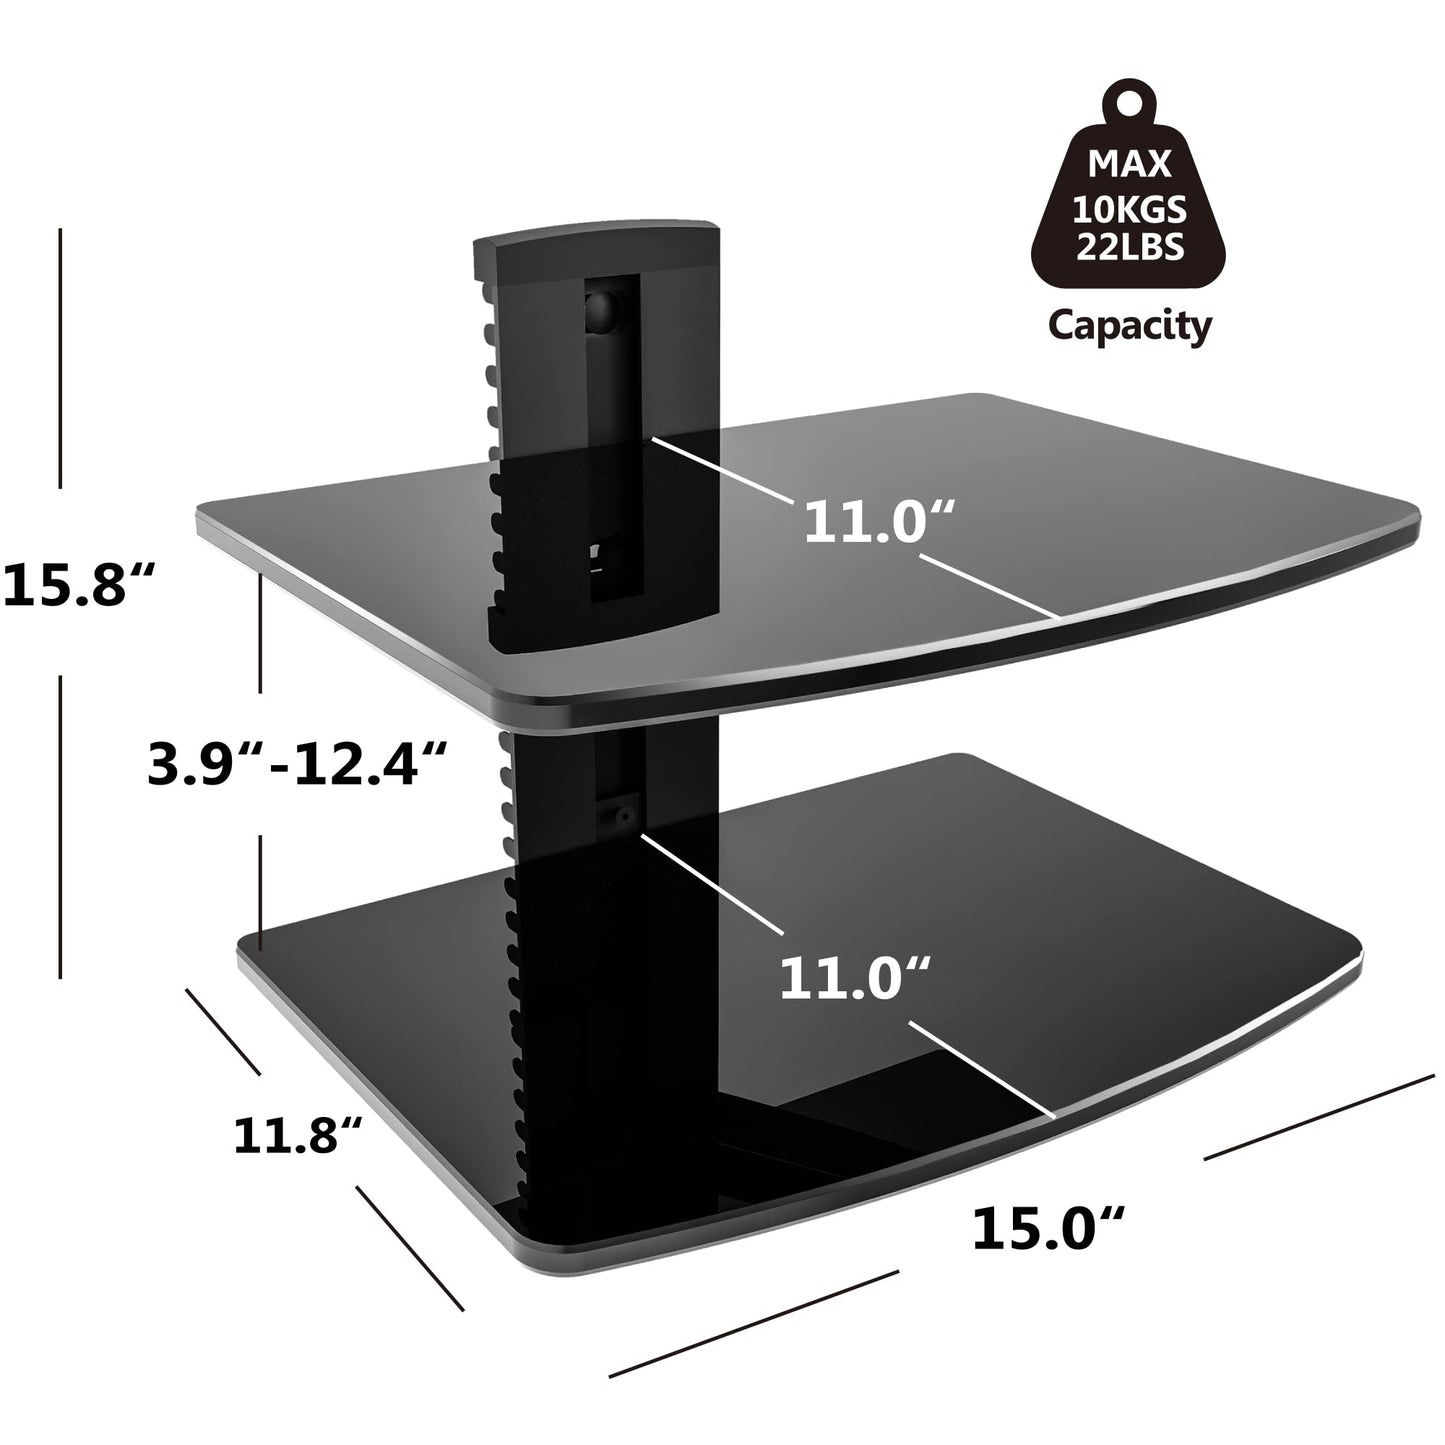 FITUEYES 2 Tiers Floating Shelves for Wall Under TV DVD Shelf Wall Mount Shelves Hold up to 22lbs Tempered Glass for PS4, Xbox, Game Console and Cable Box Black